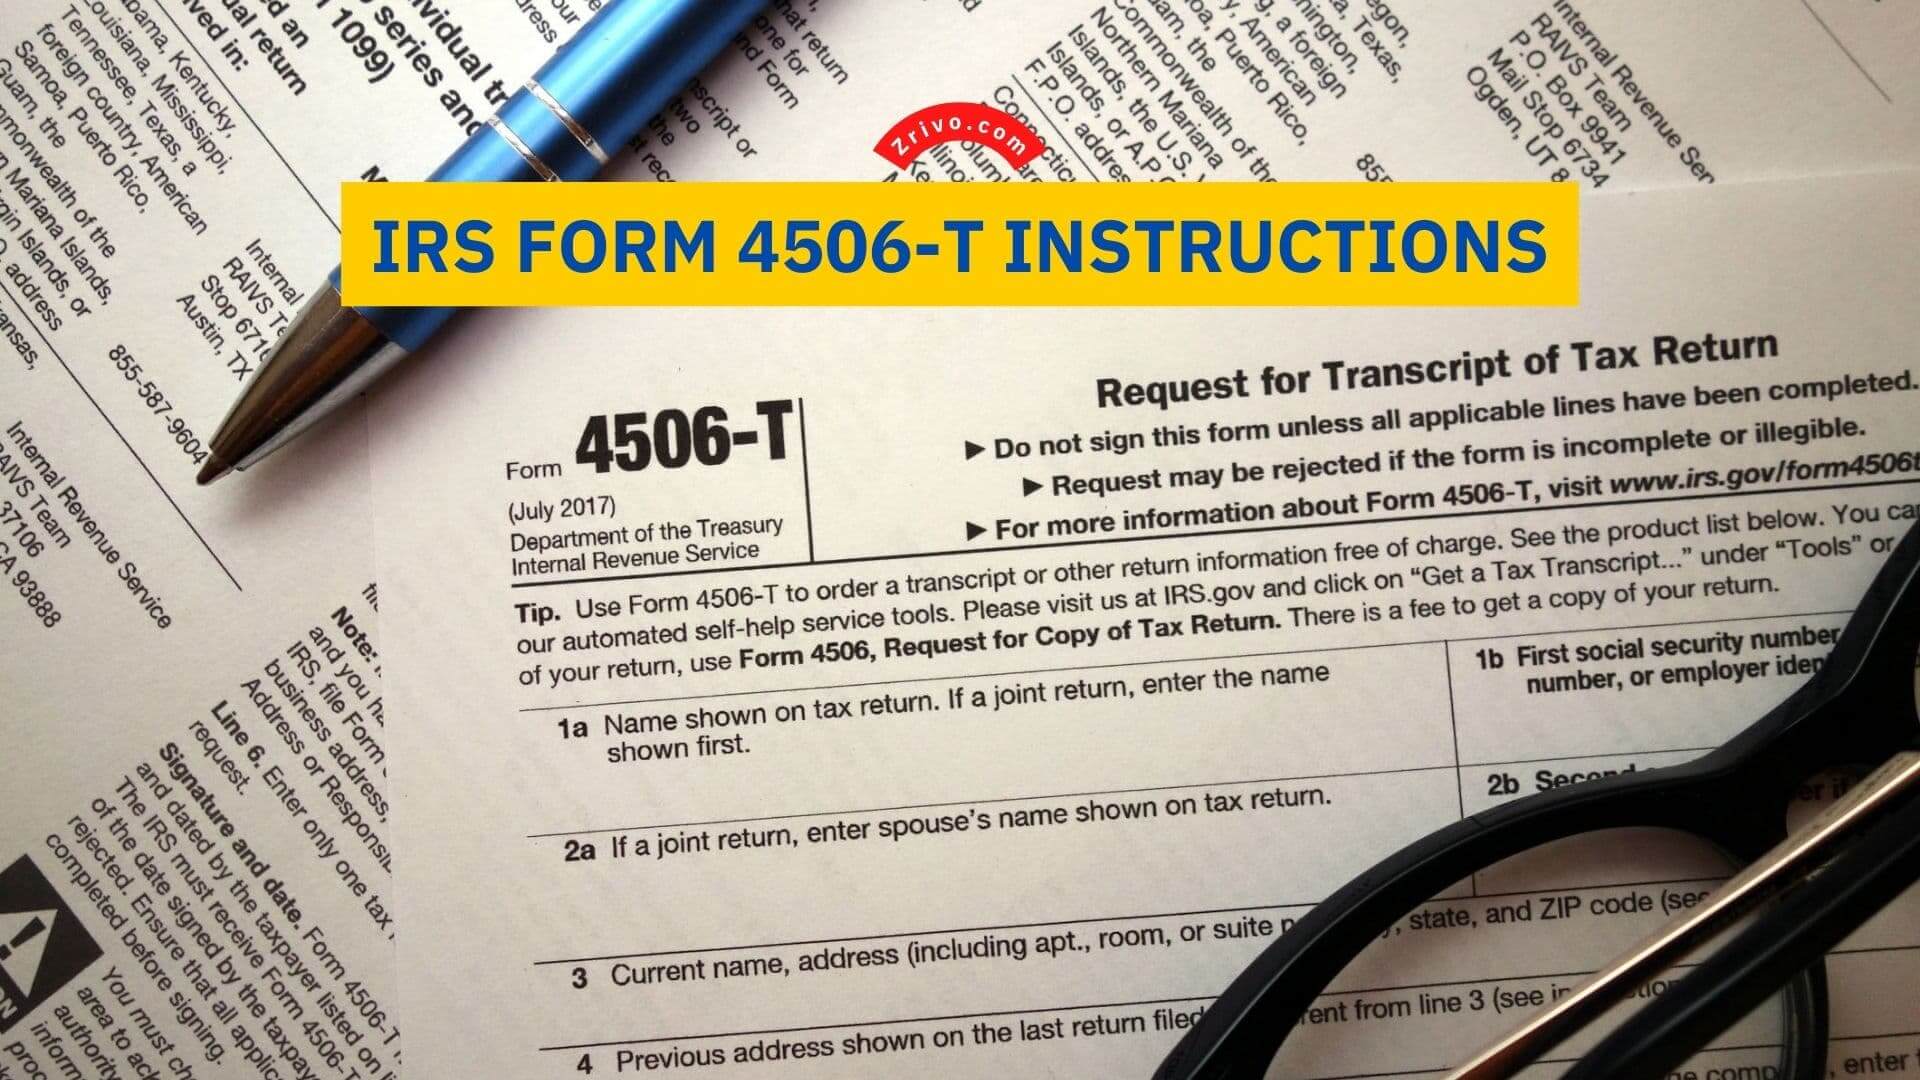 IRS Form 4506-T Instructions